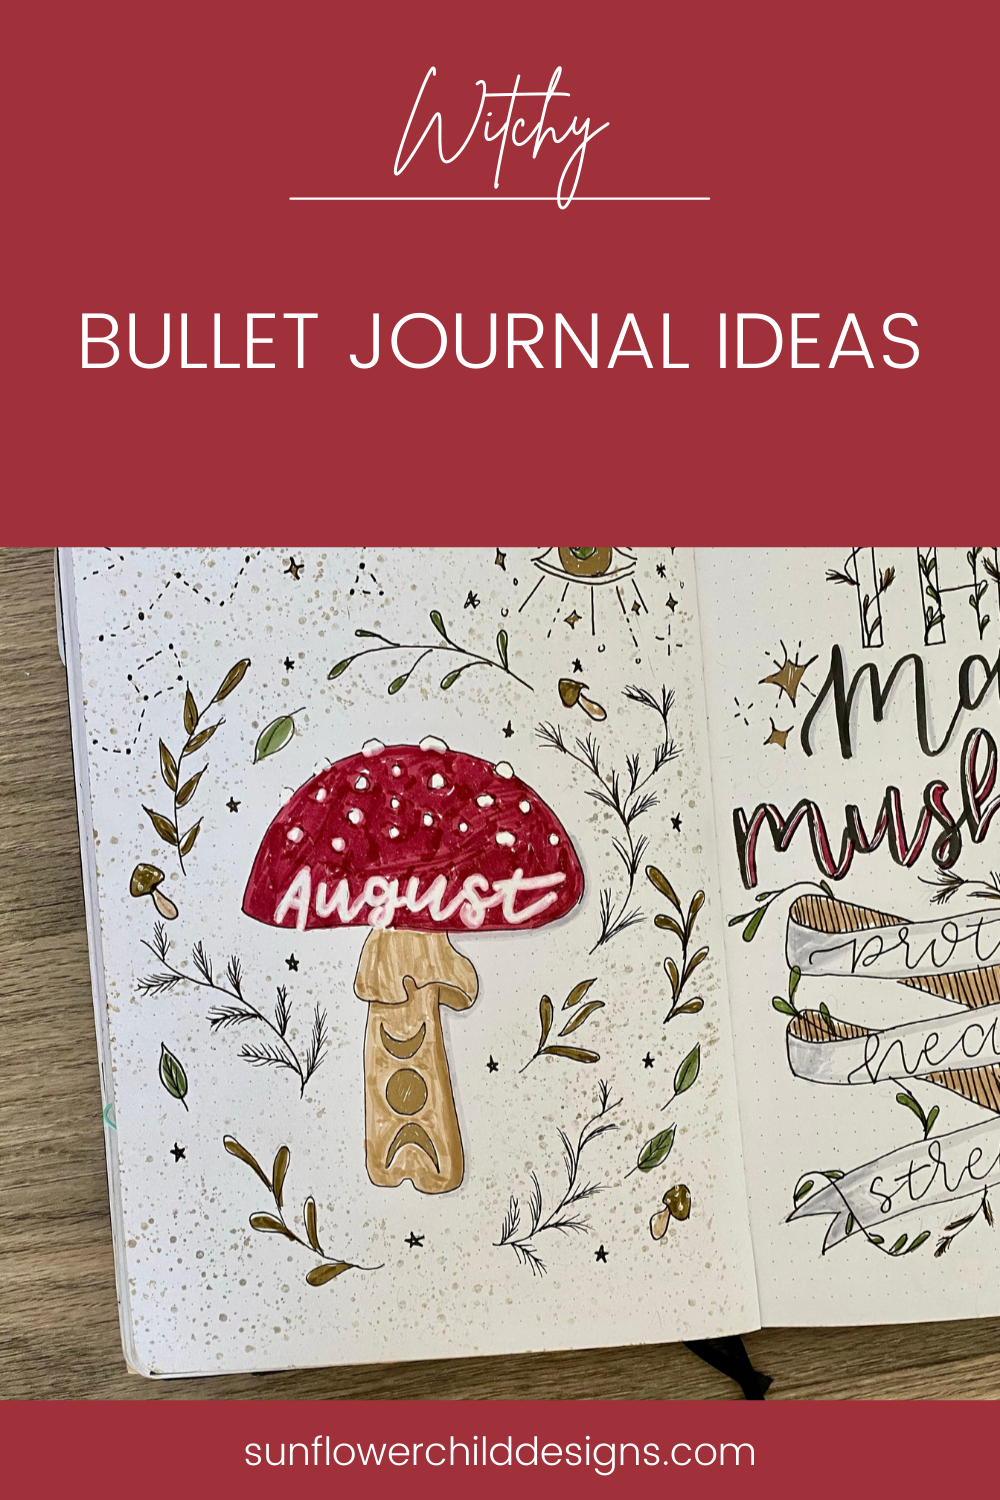 witchy-bullet-journal-ideas-august-bullet-journal-ideas 8.png